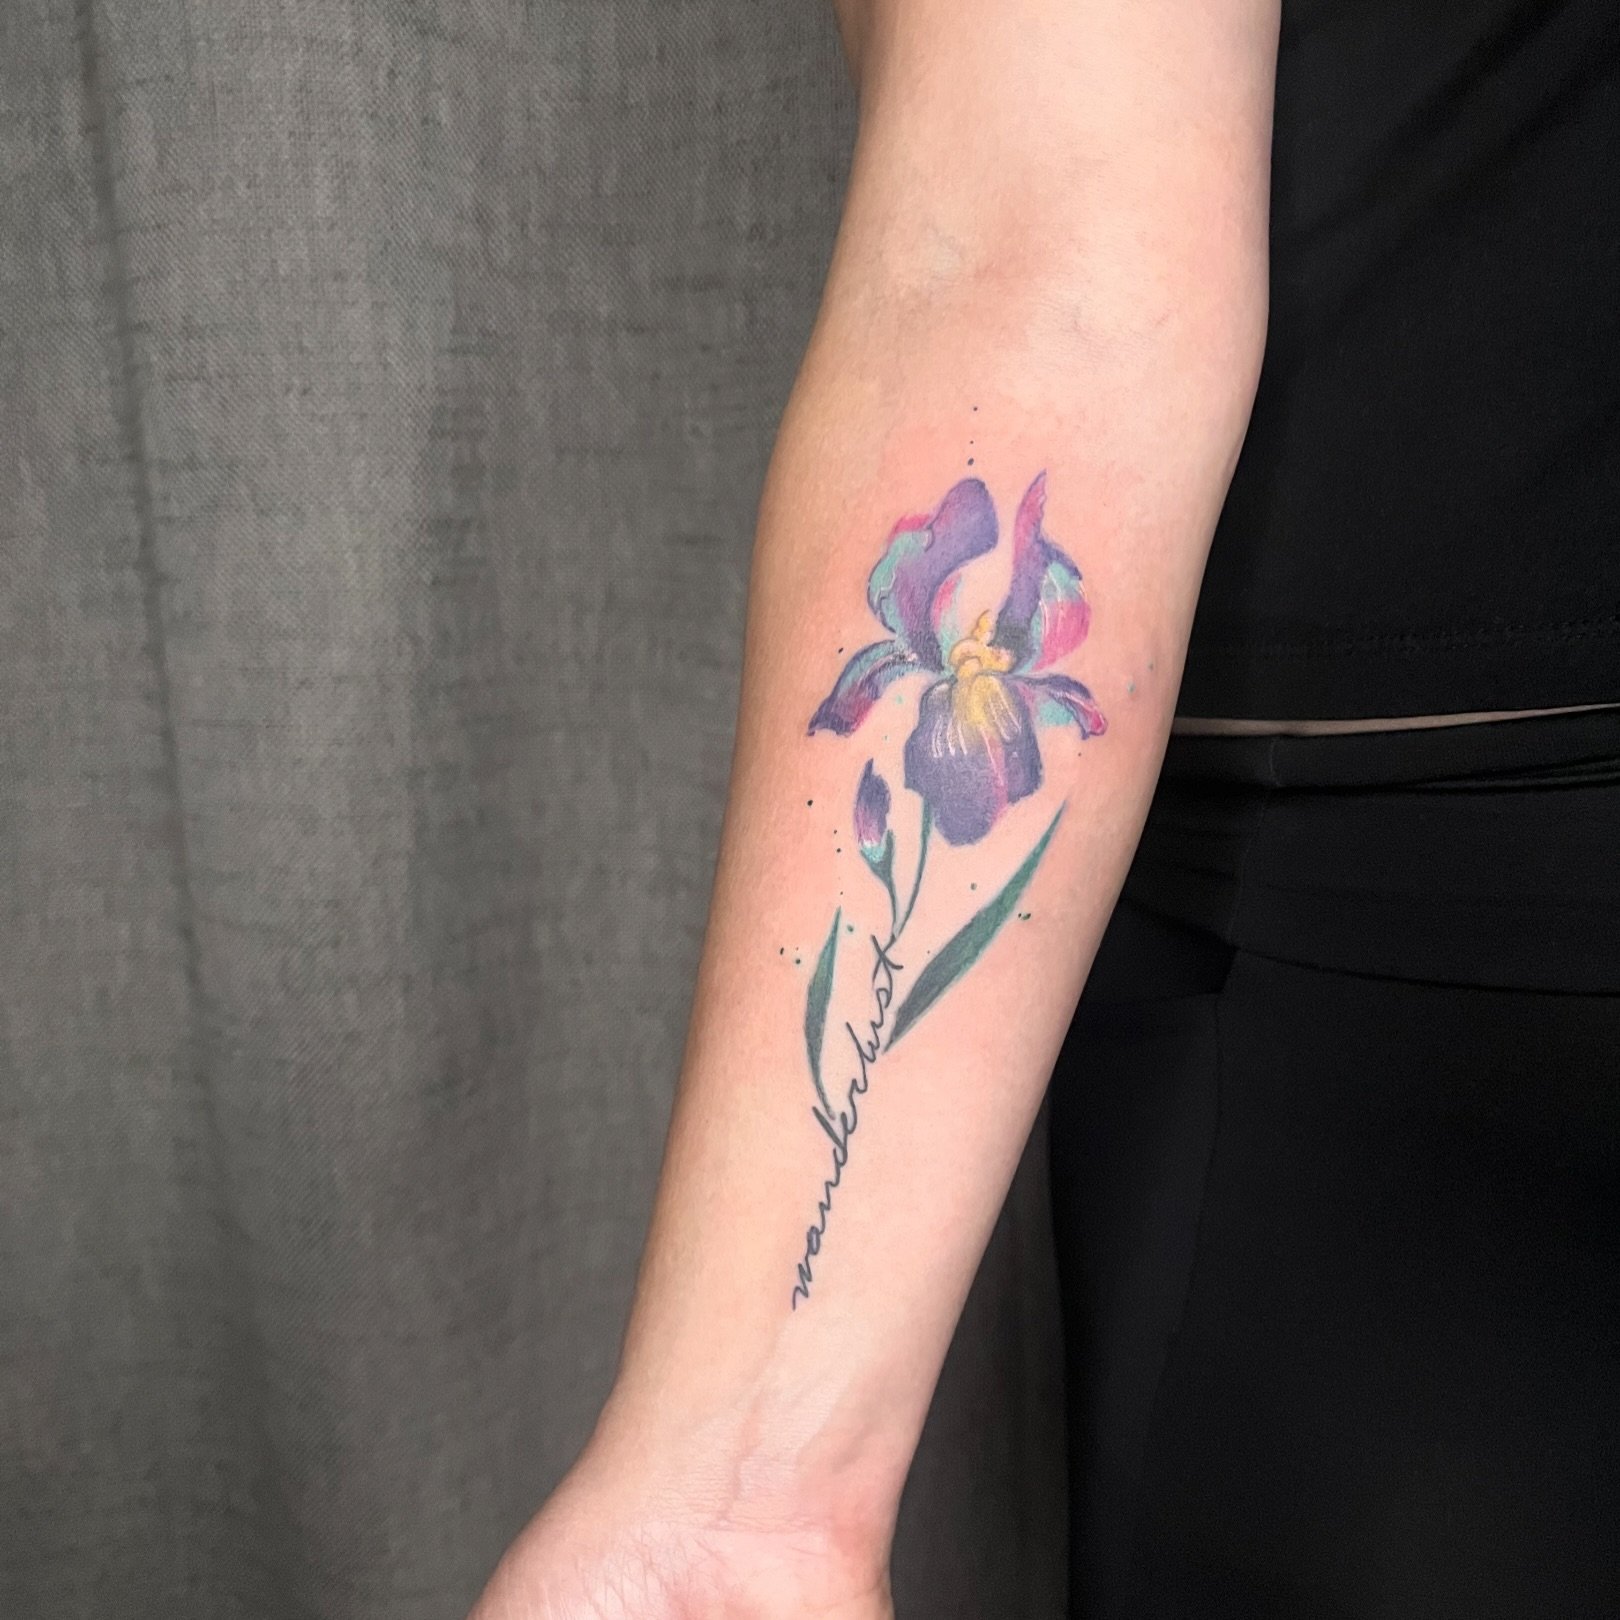 Fact: the iris is the state flower of Tennessee and Nashville is on the backend of them all blooming

#watercolortattoo #iristattoo #flowertattoo #nashvilletattooartist